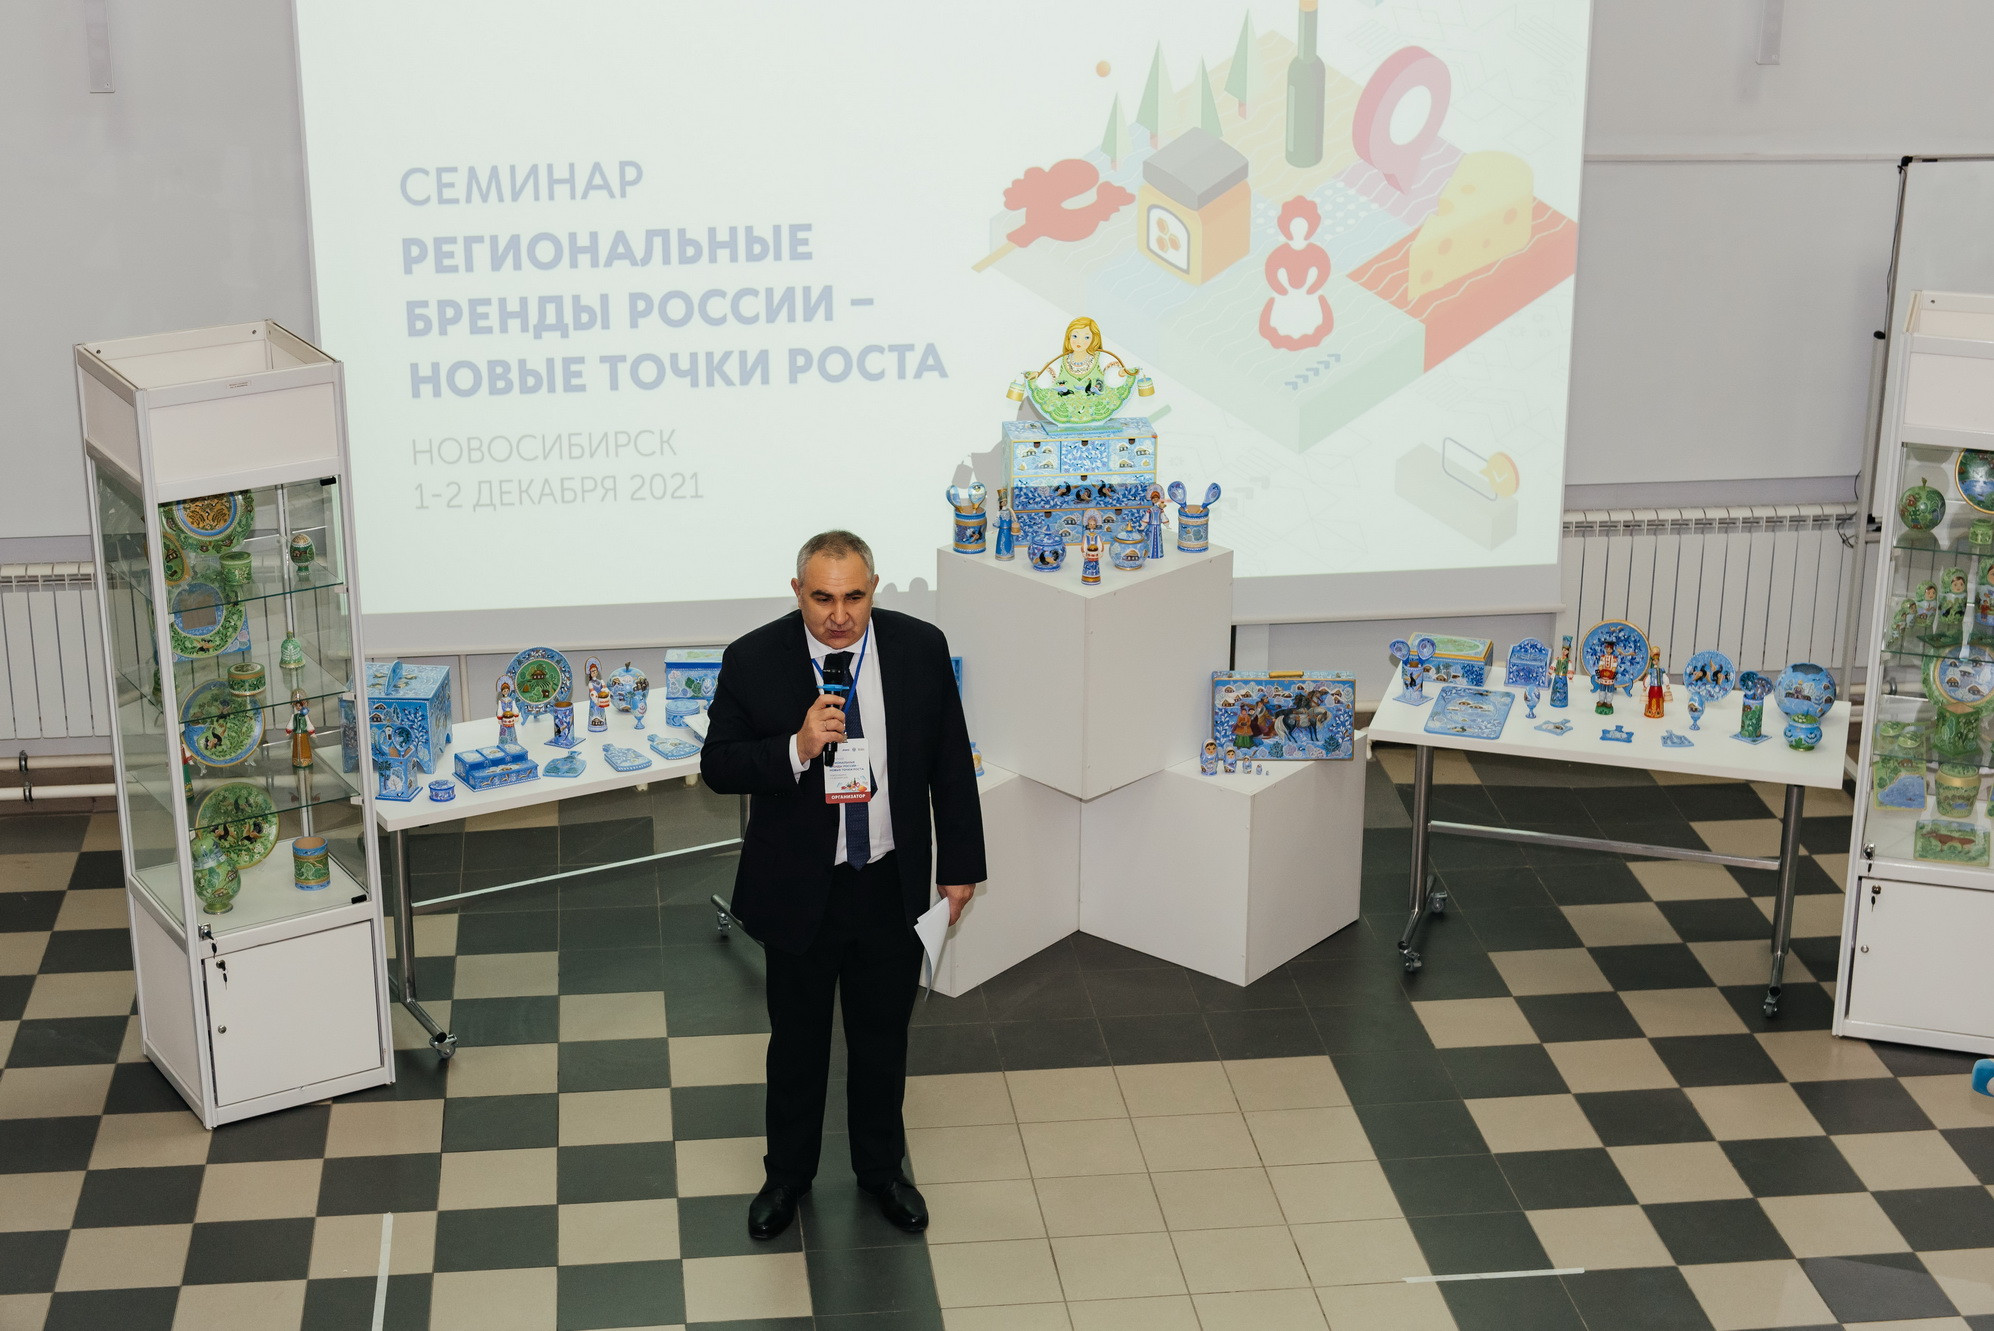 The exhibition "Ordynka Painting" and a seminar on territorial branding were held at NSTU NETI